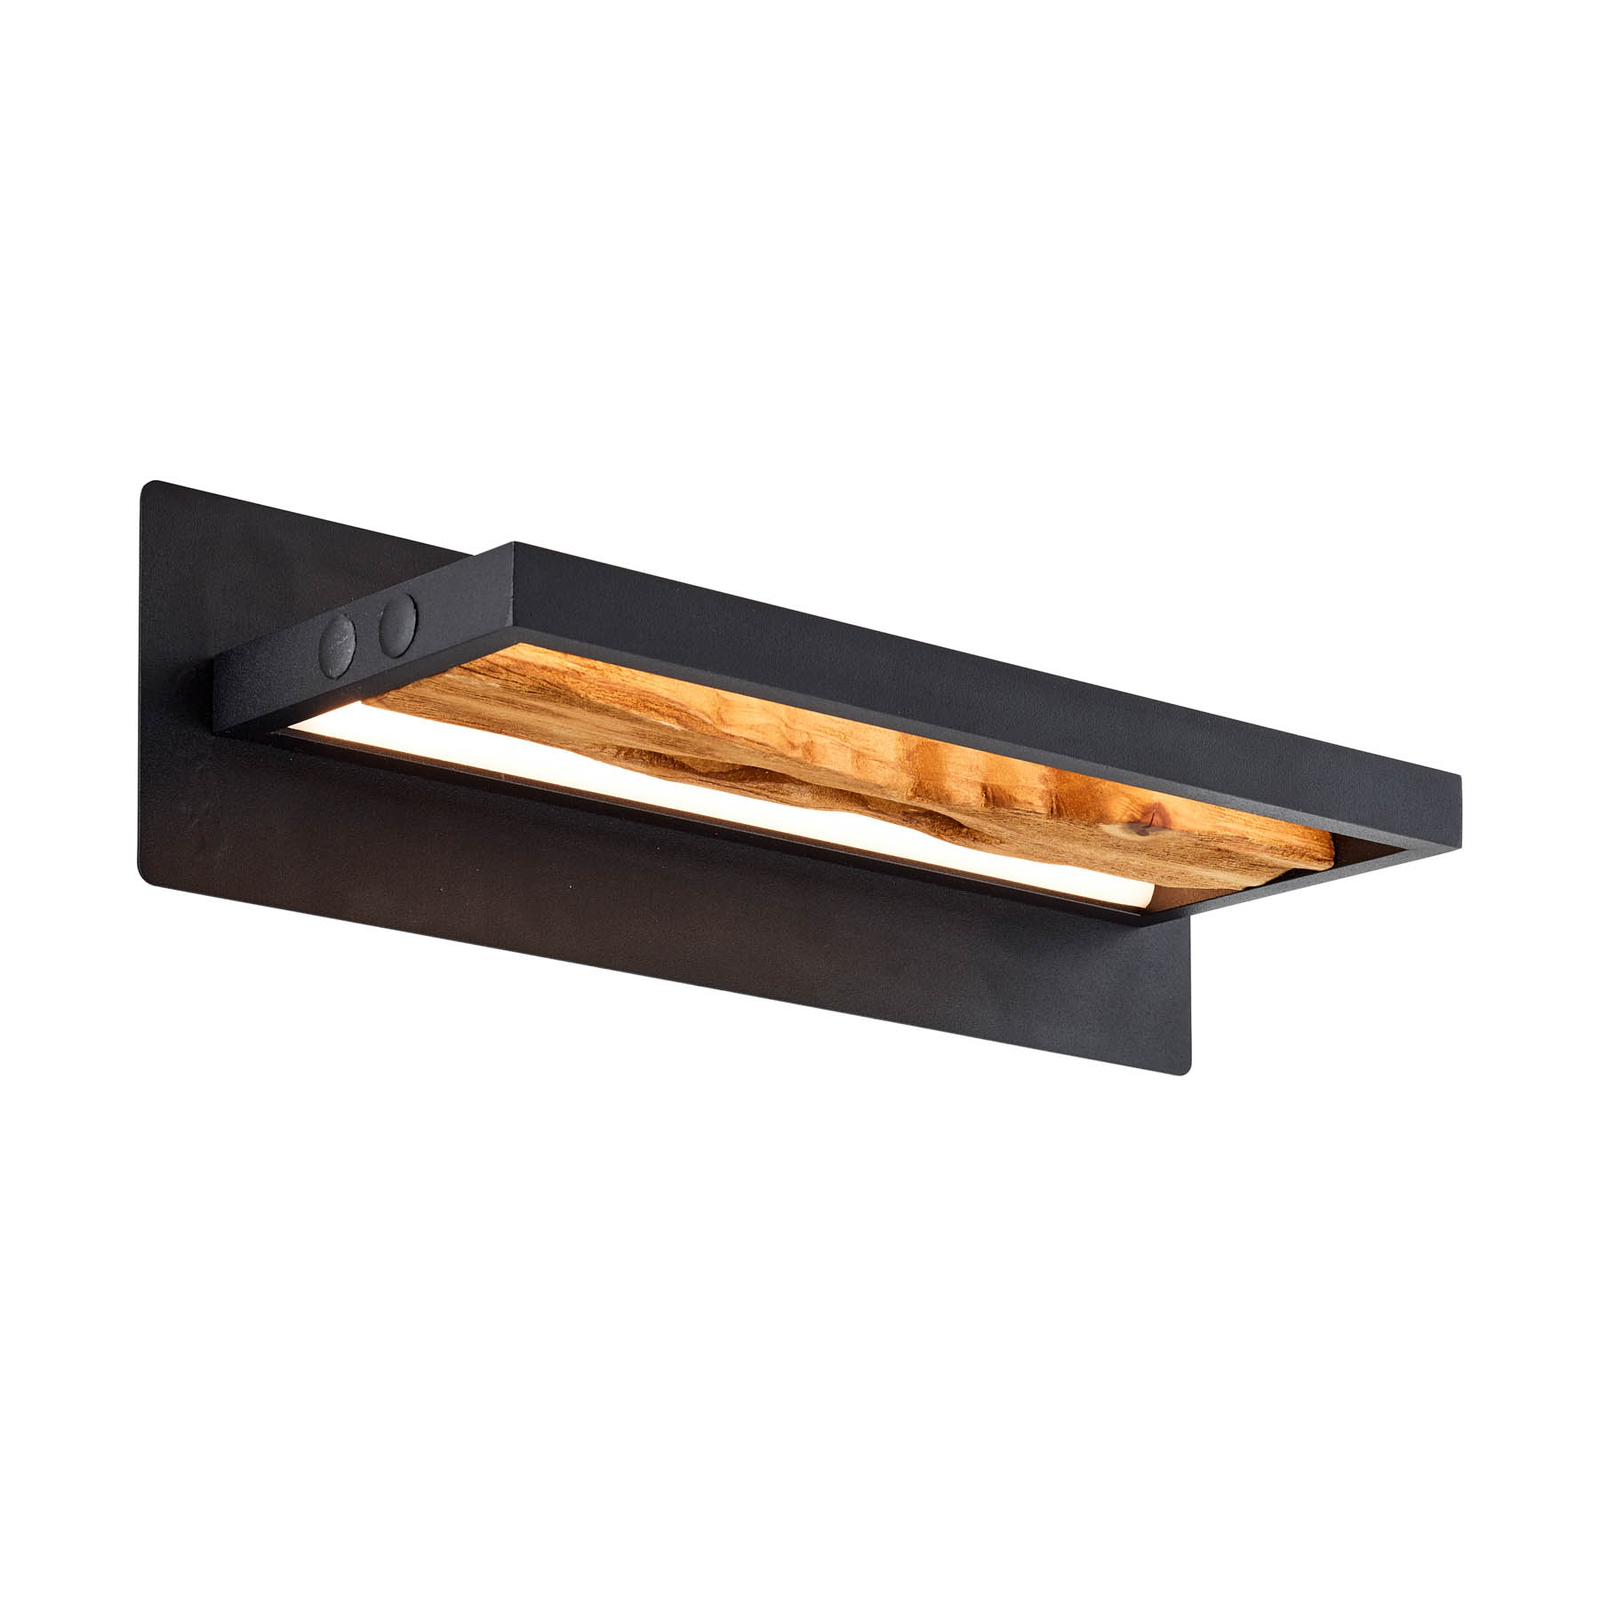 Chaumont LED wall light made of wood